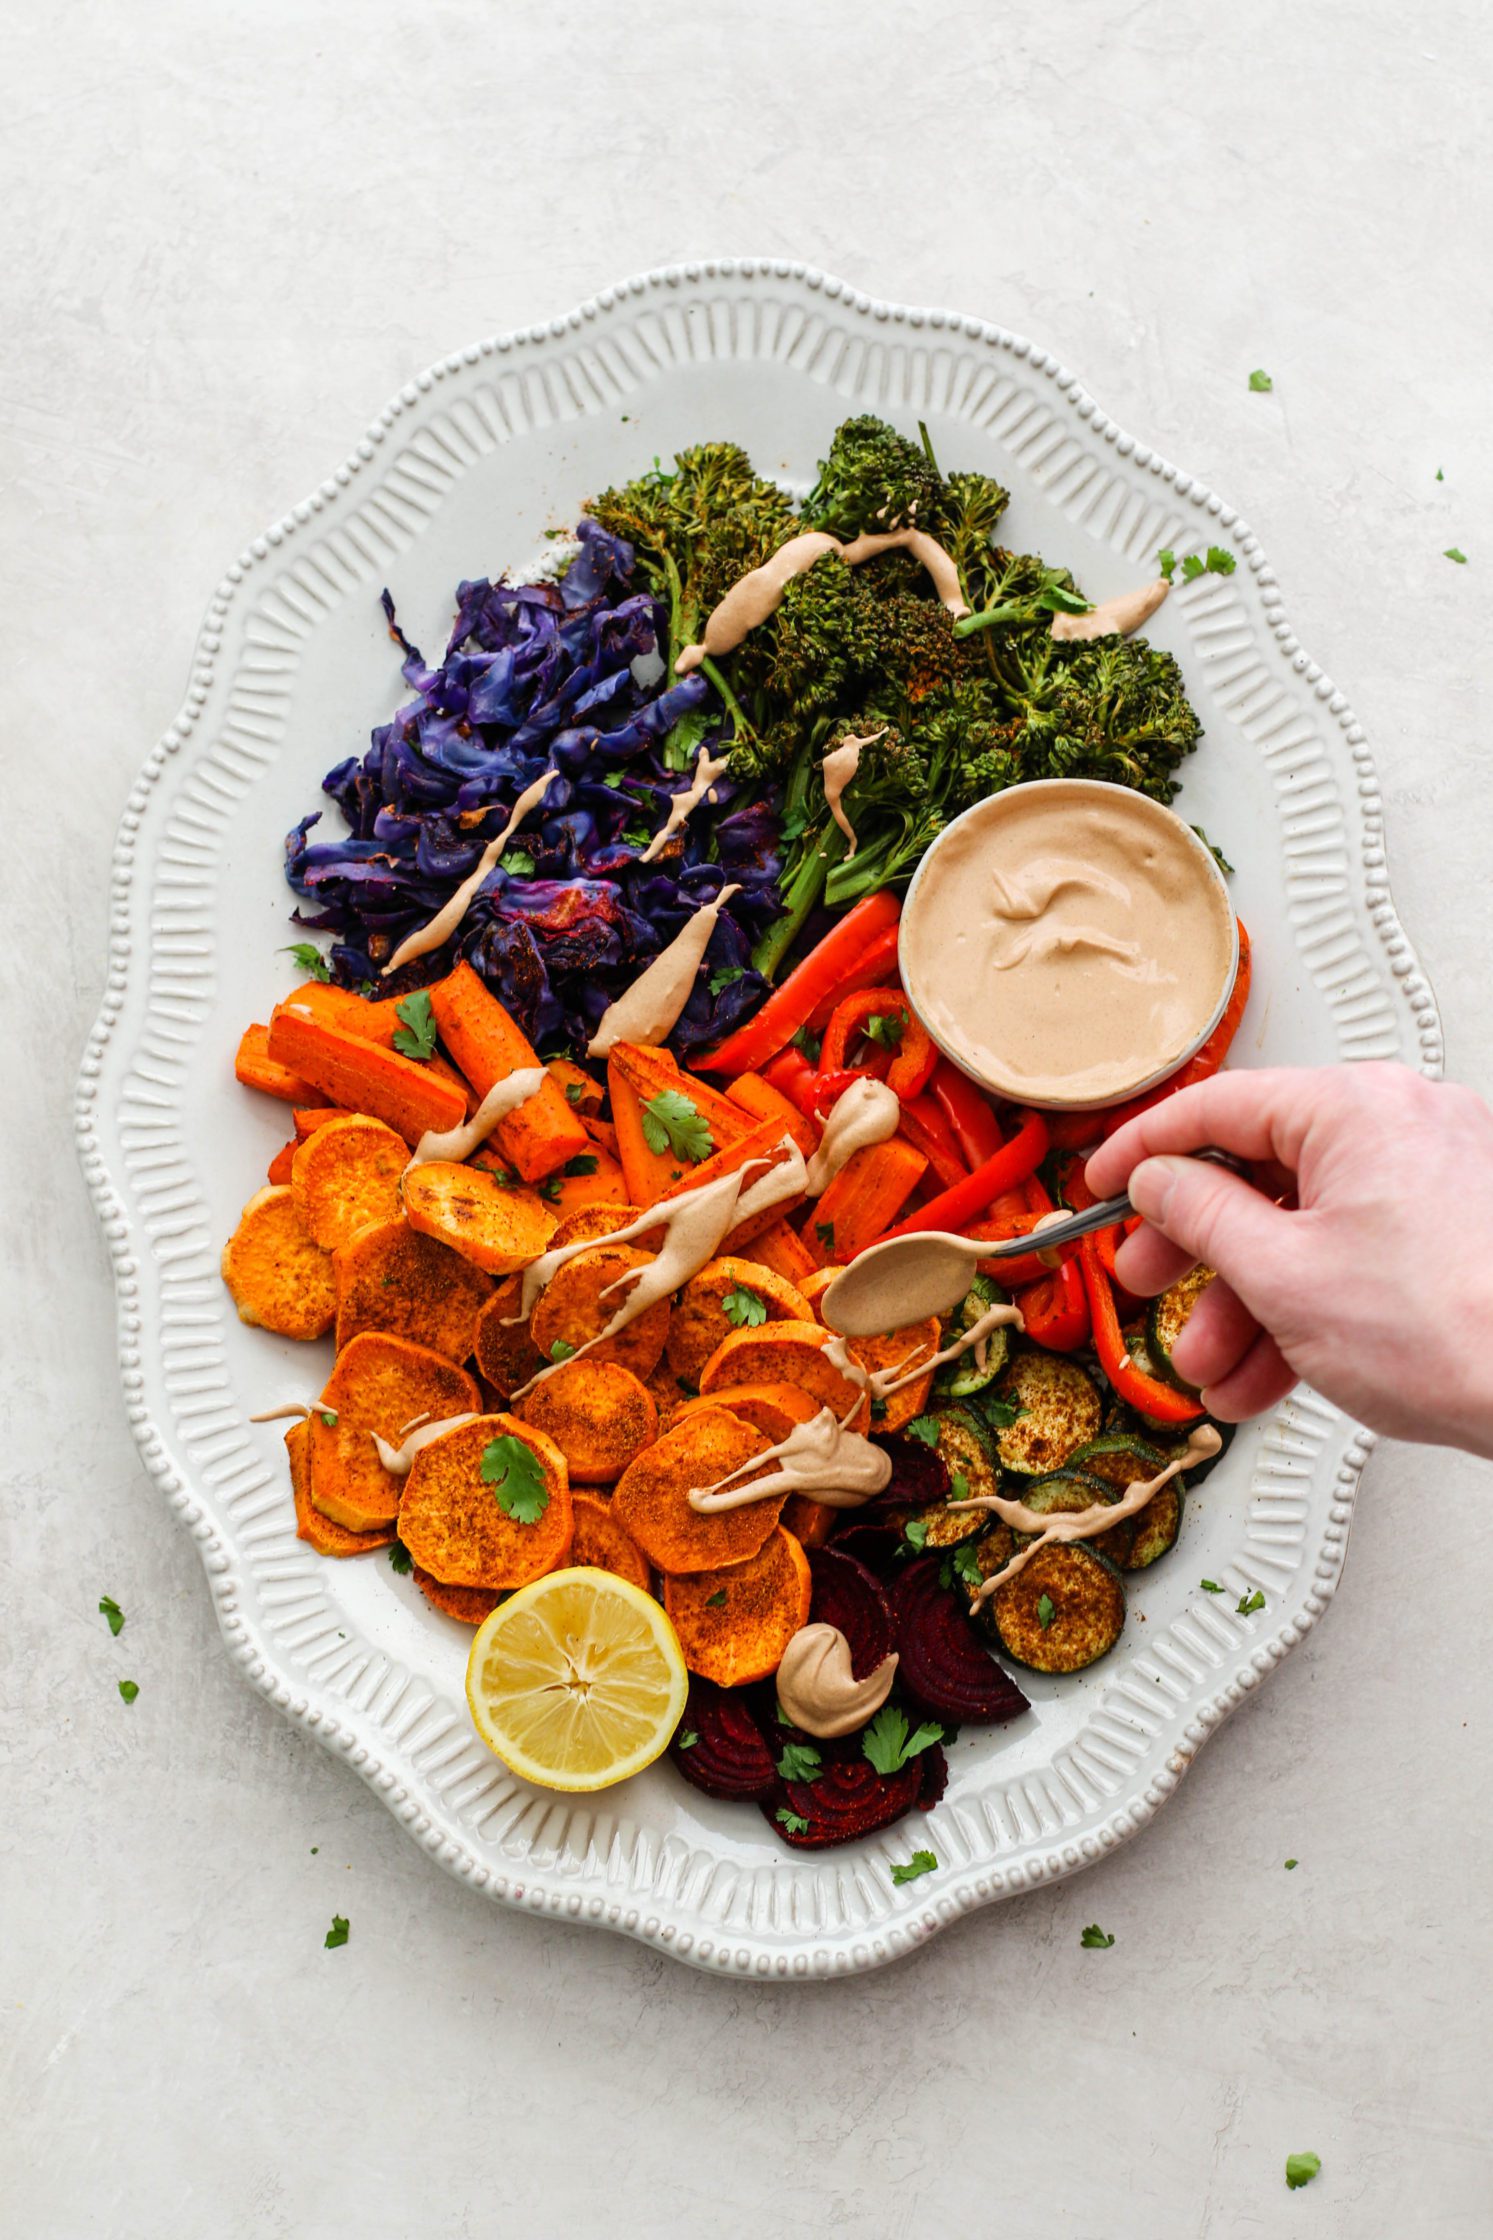 Oil-Free Roasted Veggies with Almond Butter Sauce